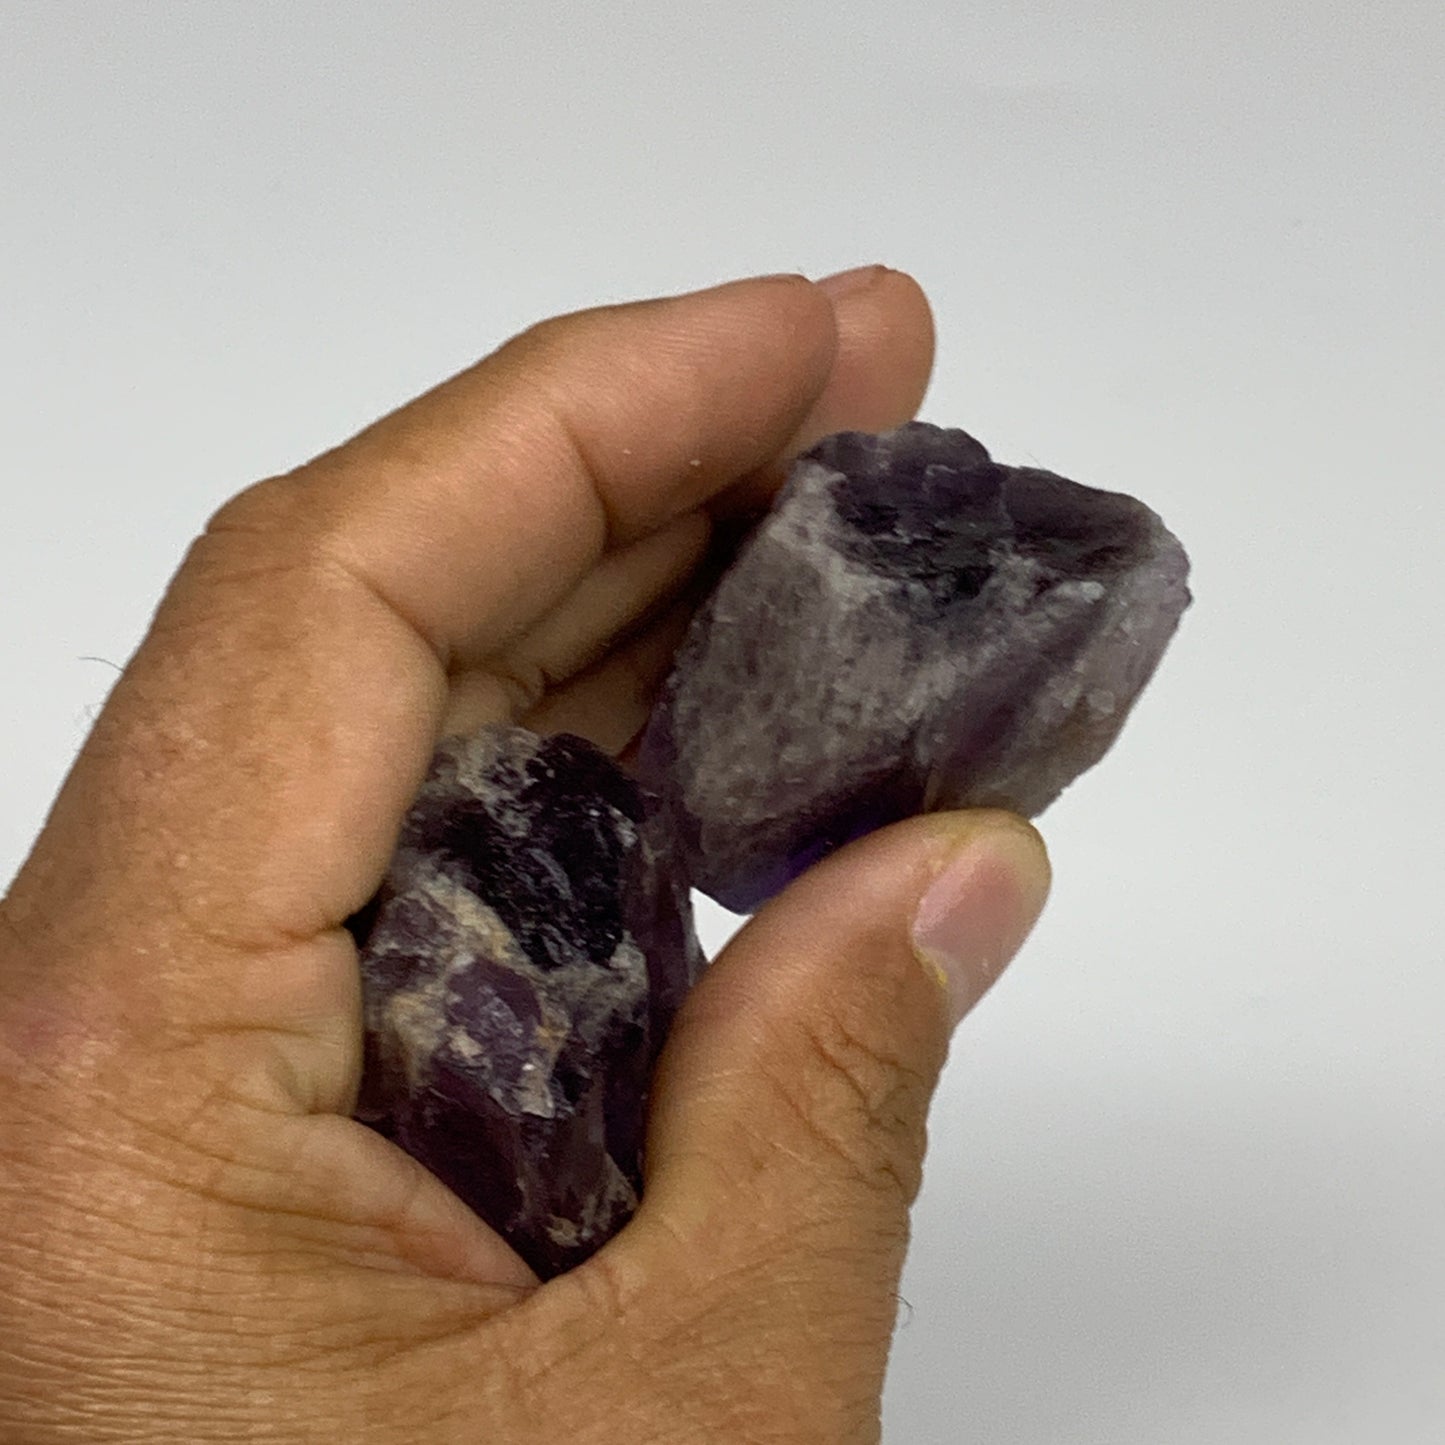 116.7g, 2" - 2.4", 2pcs, Amethyst Point Polished Rough lower part, B32397